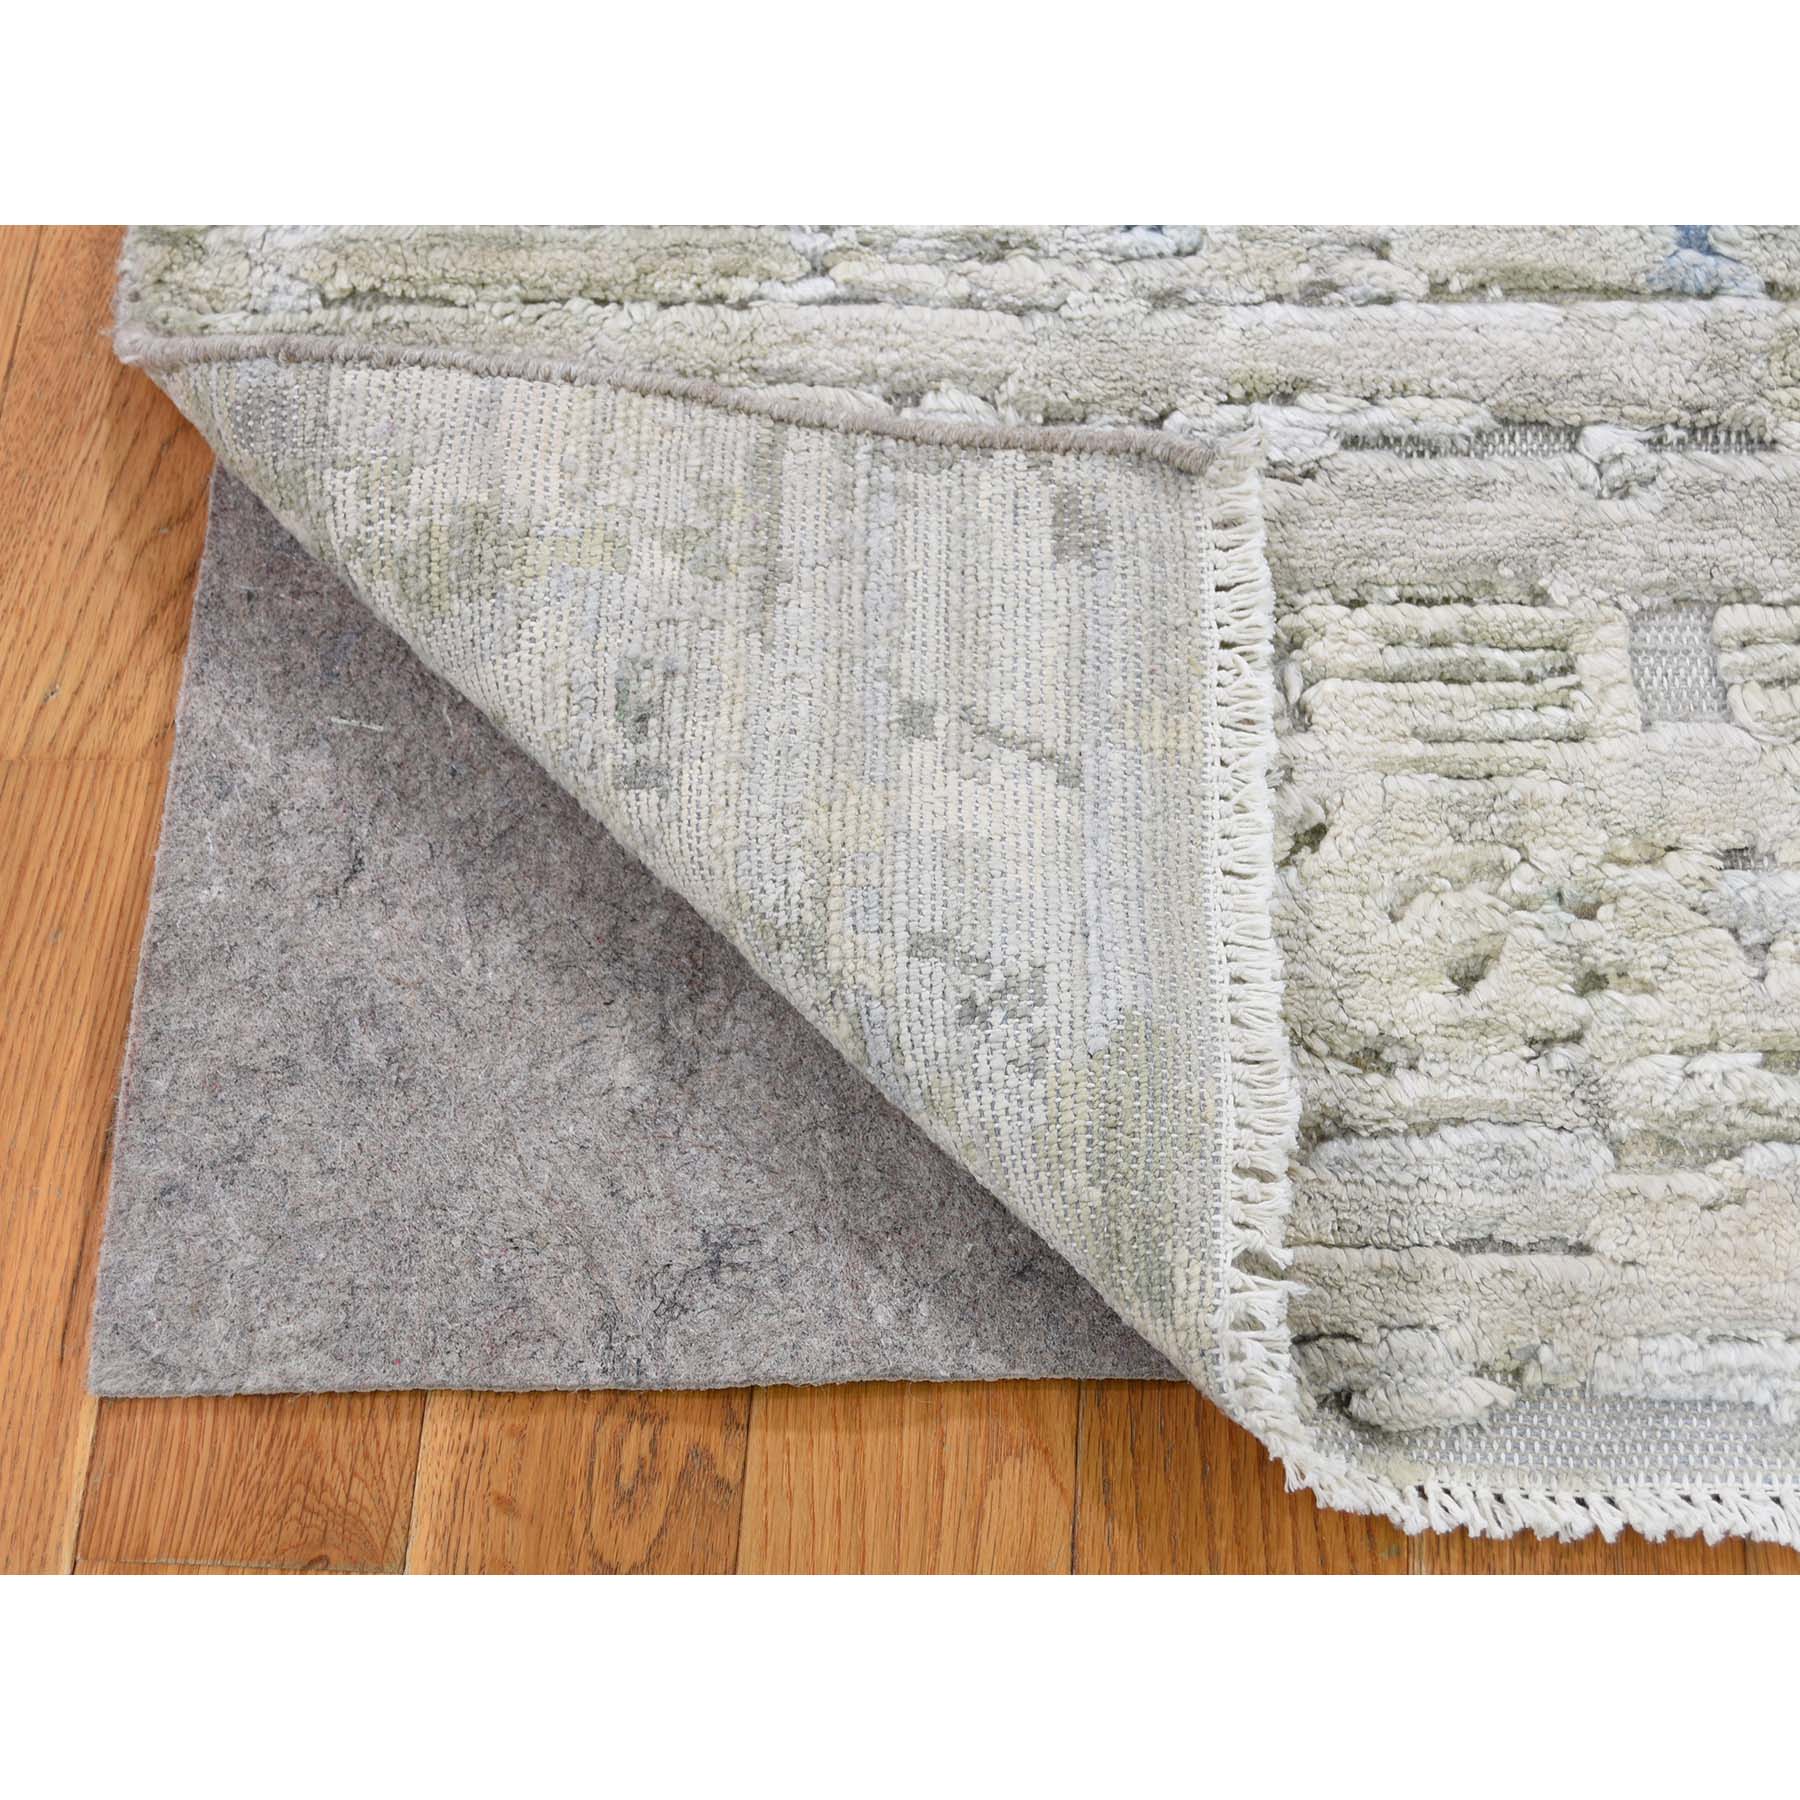 2'x2' Sampler Textured Pure Silk With Textured wool Hand Woven Oriental Rug 